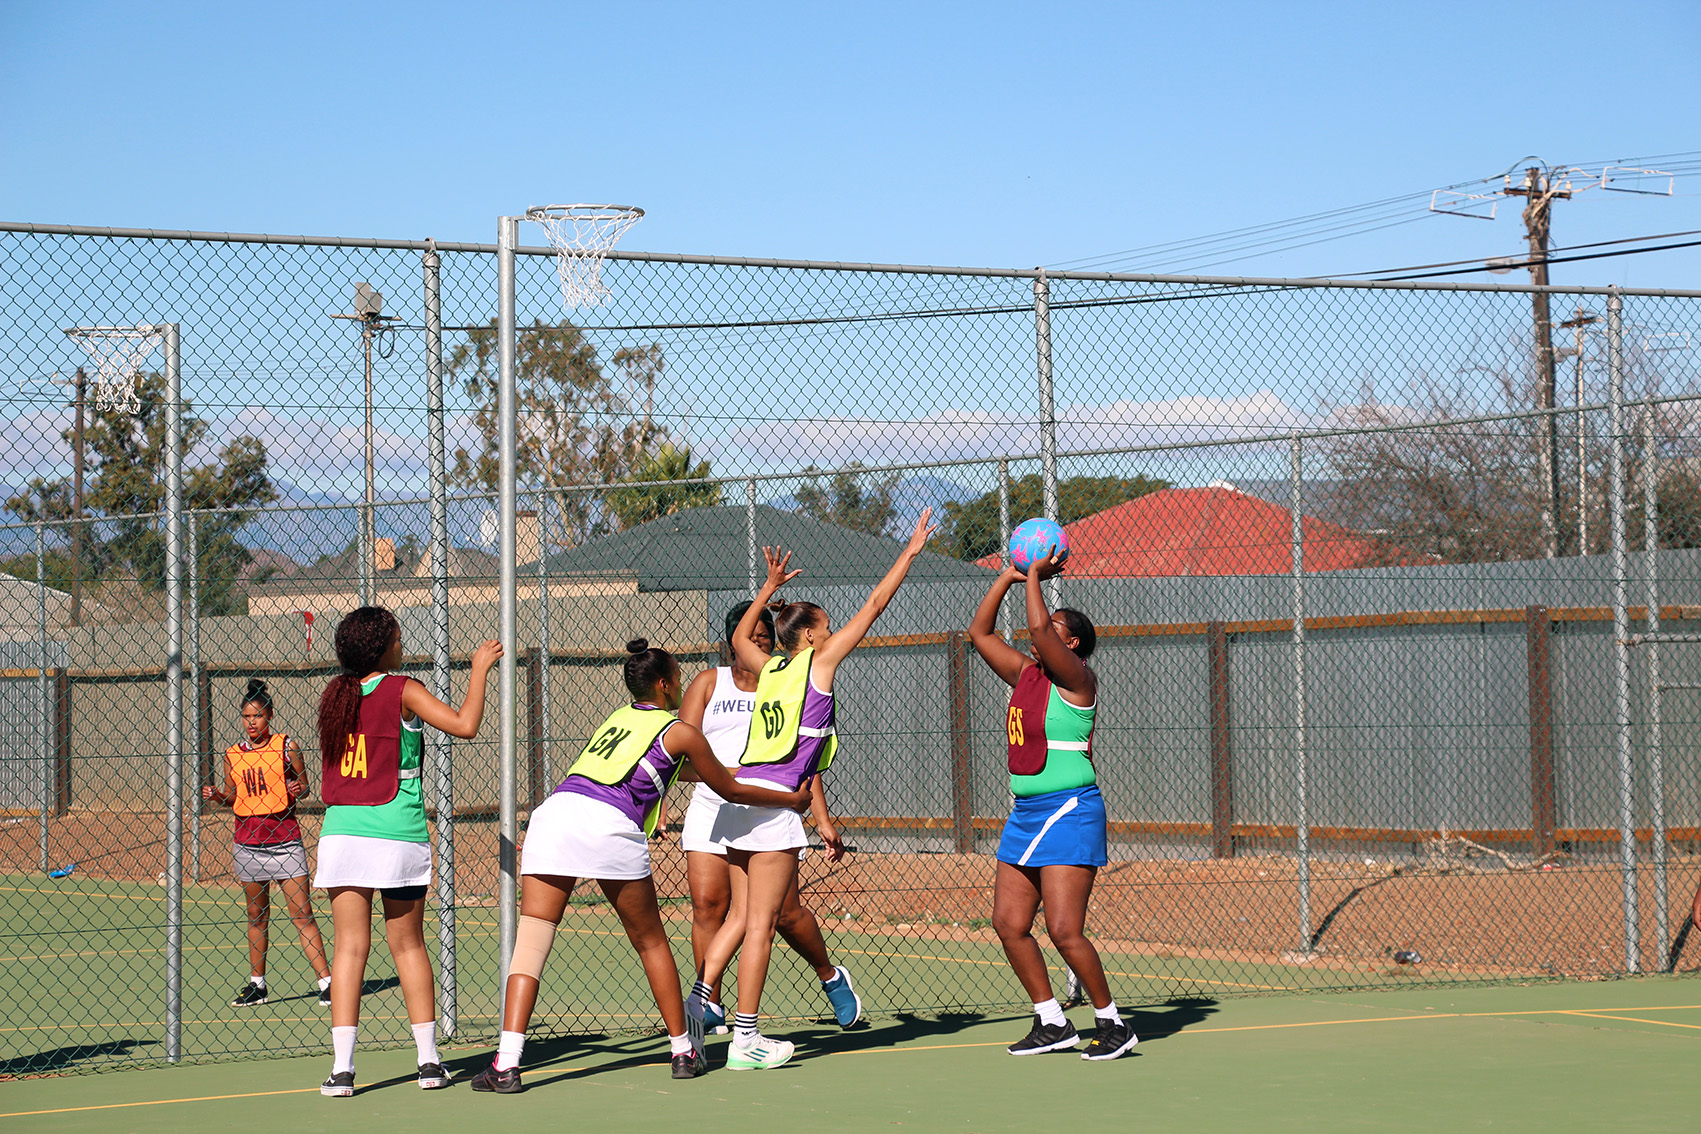 De Doorns played a thrilling netball game against Central Karoo